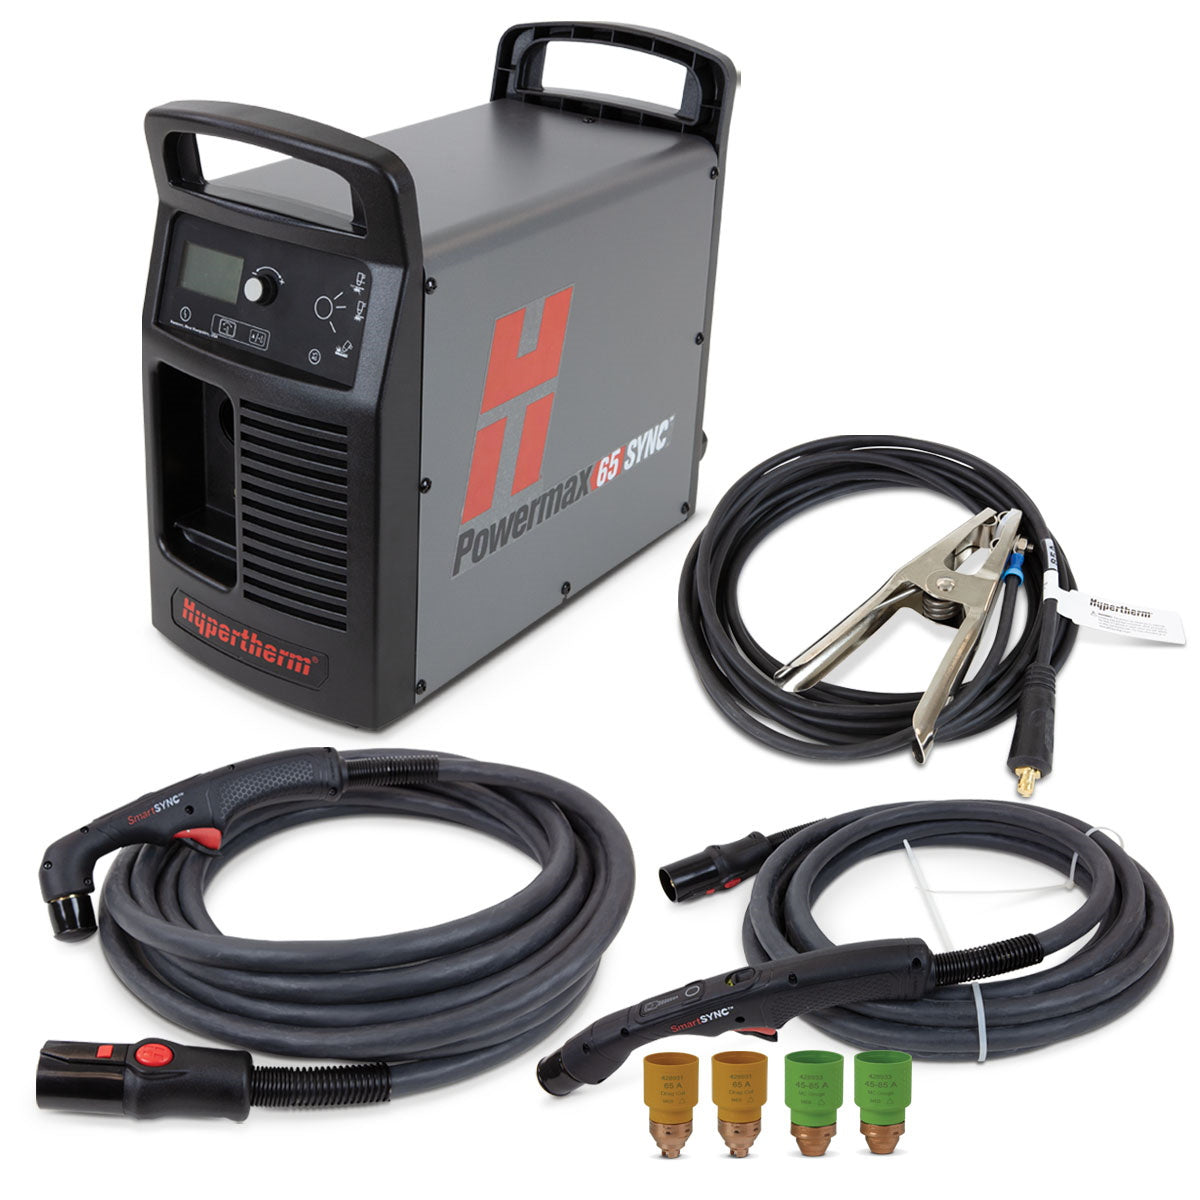 Hypertherm Powermax 65 Sync Plasma w/25ft 75° and 15° Hand Torch (083347)